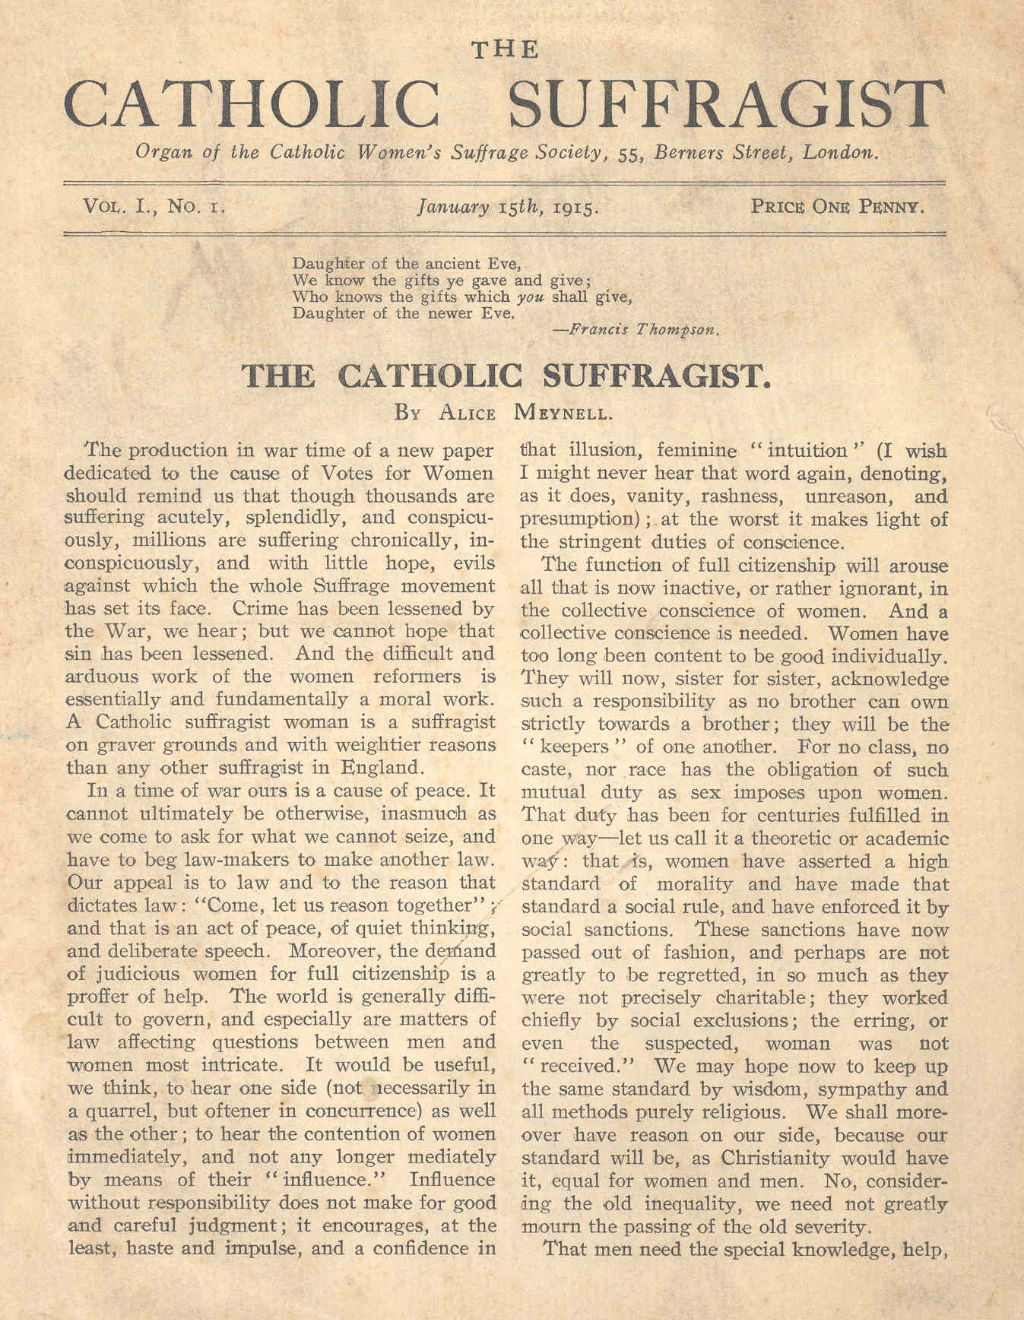 First issue of 'The Catholic Suffragist', journal of the Catholic Women's Suffrage Society, 15 January 1915